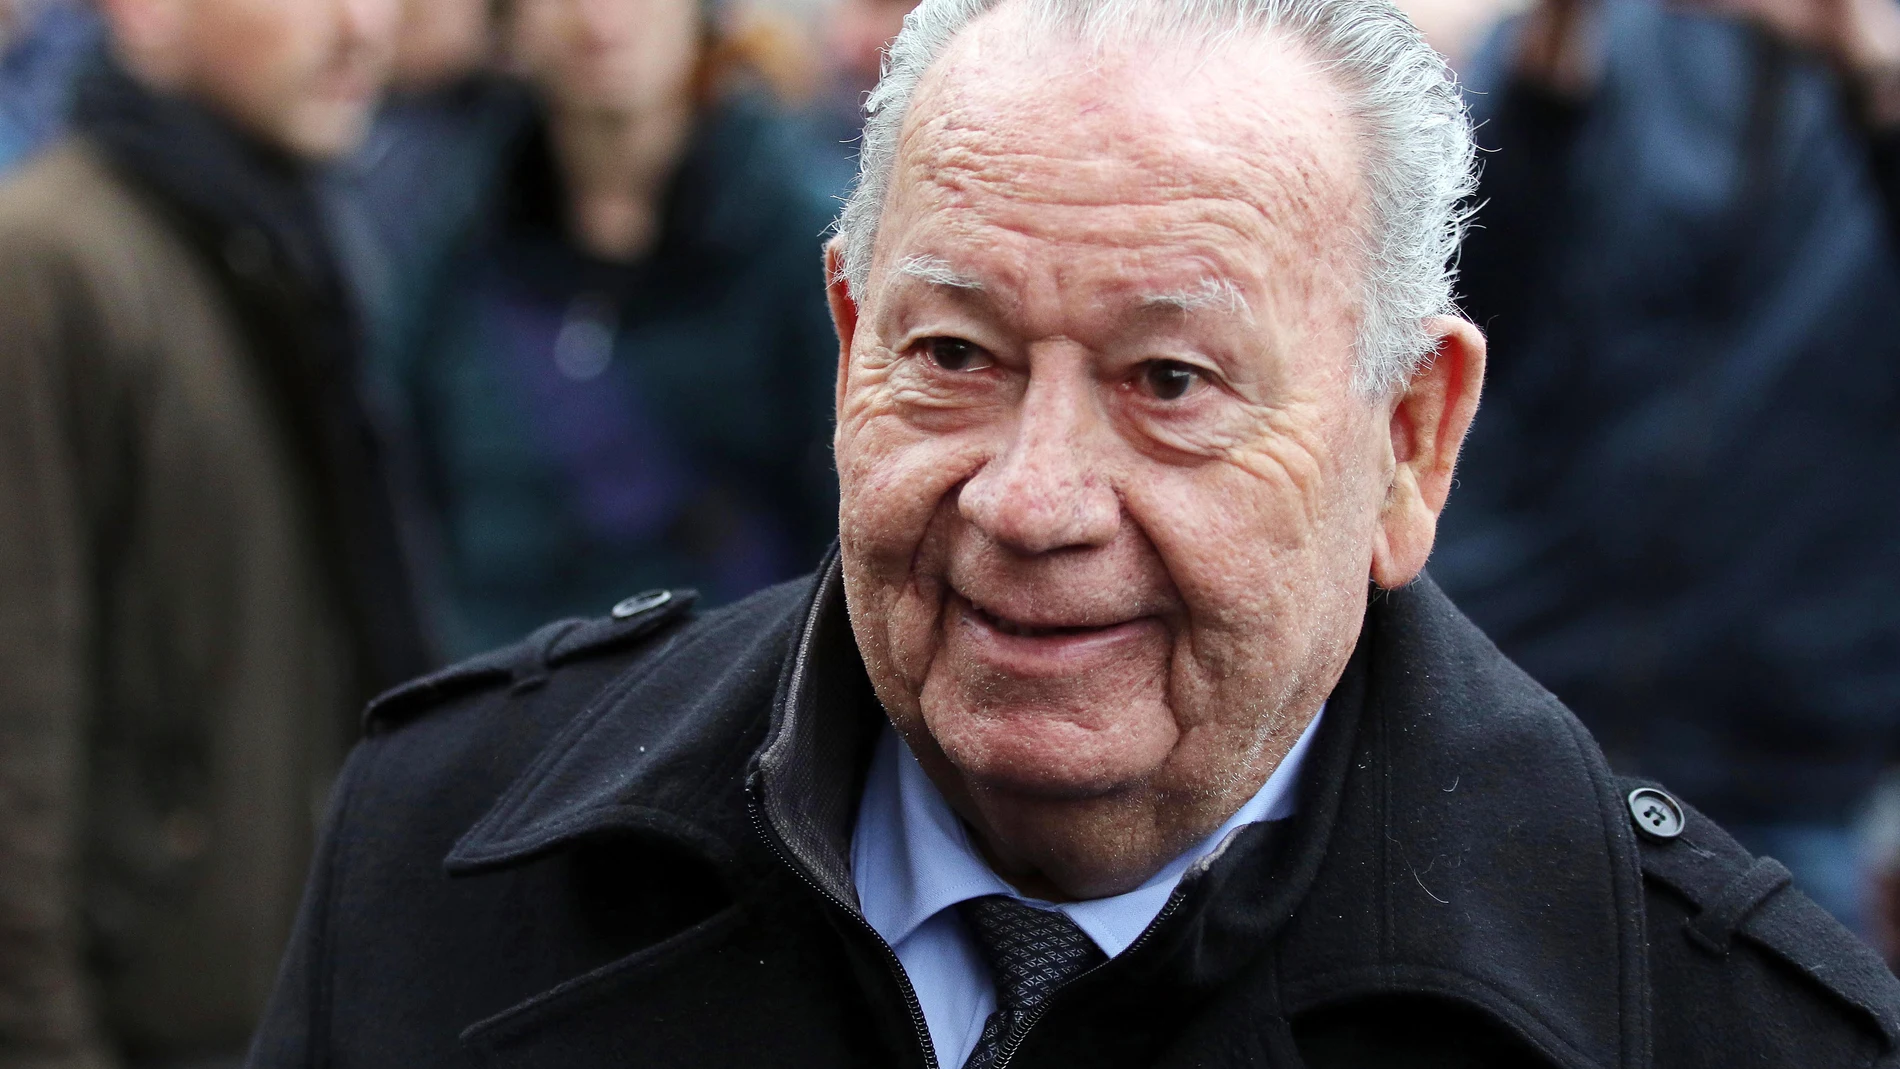 Angers (France).- (FILE) Former French soccer player Just Fontaine arrives for the funeral ceremony of late French soccer legend Raymond Kopa at the cathedral Saint Maurice in Angers, western France, 08 March 2017 (re-issued 01 March 2023). French soccer legend Just Fontaine has passed away at the age of 89 his family announced on 01 March 2023. (Francia) EFE/EPA/EDDY LEMAISTRE *** Local Caption *** 53375559 